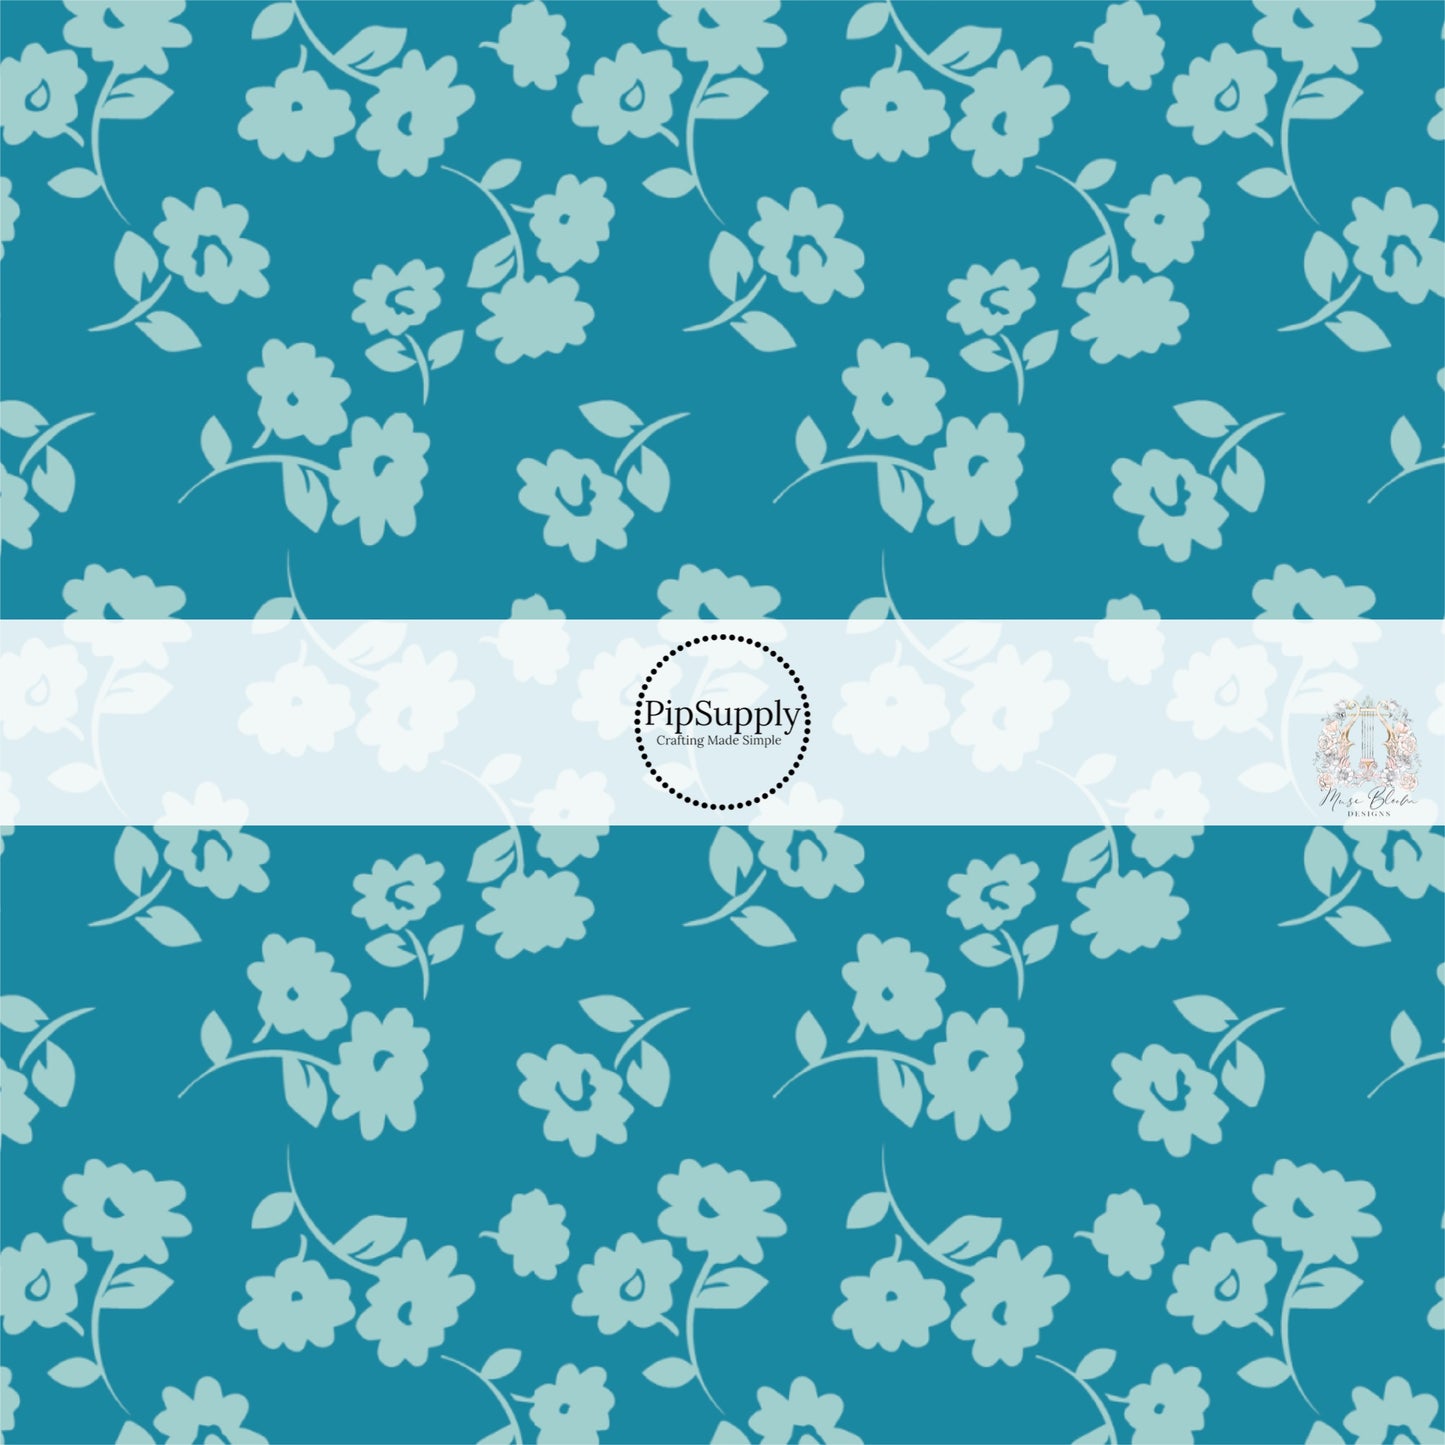 These floral themed dark teal fabric by the yard features light blue flowers on dark teal. This fun summer floral themed fabric can be used for all your sewing and crafting needs! 